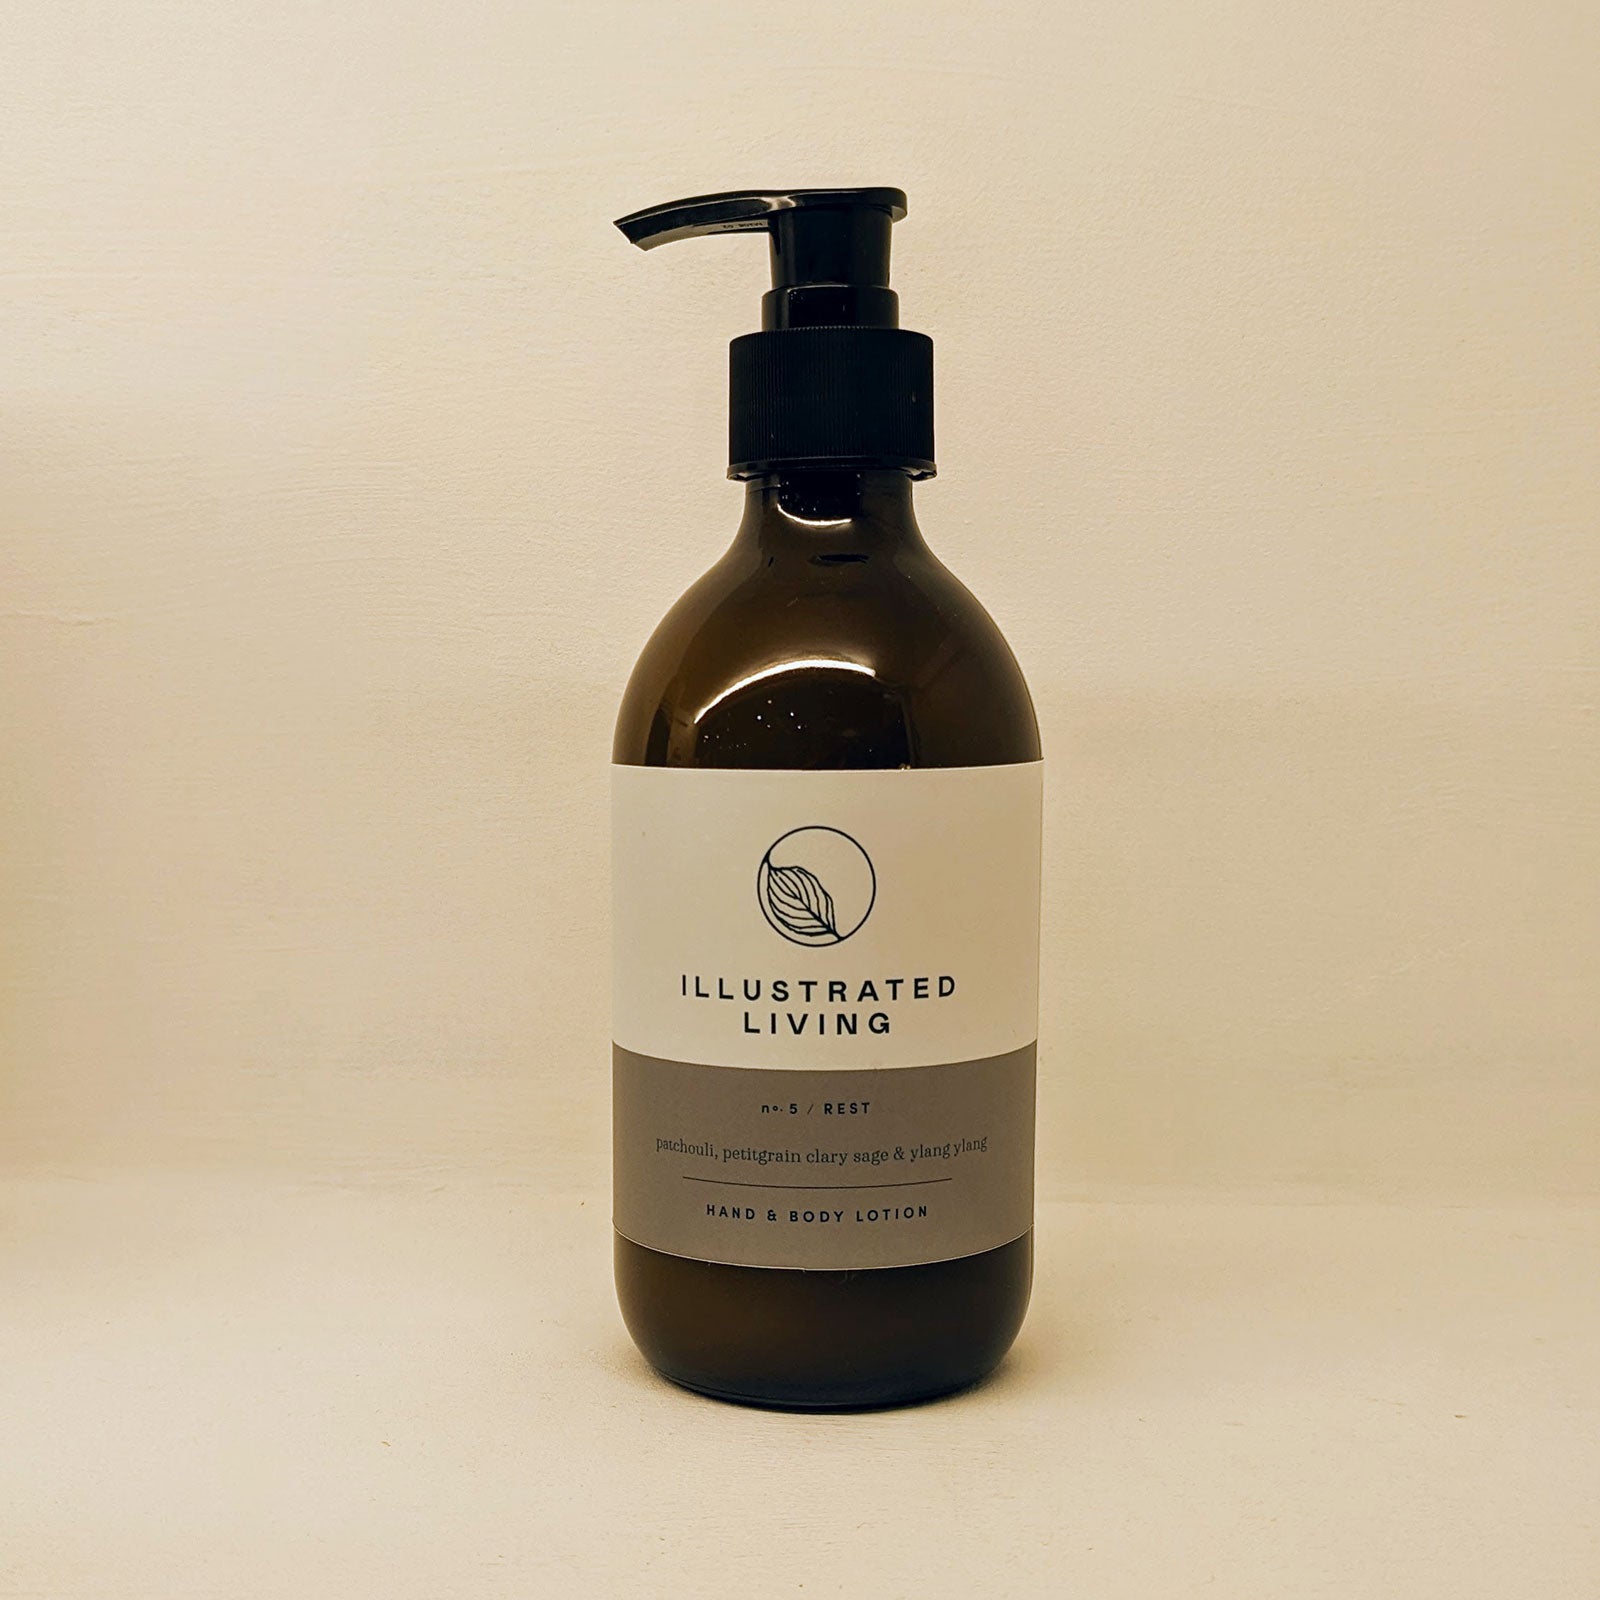 Hand & Body Lotion No 5 - Rest